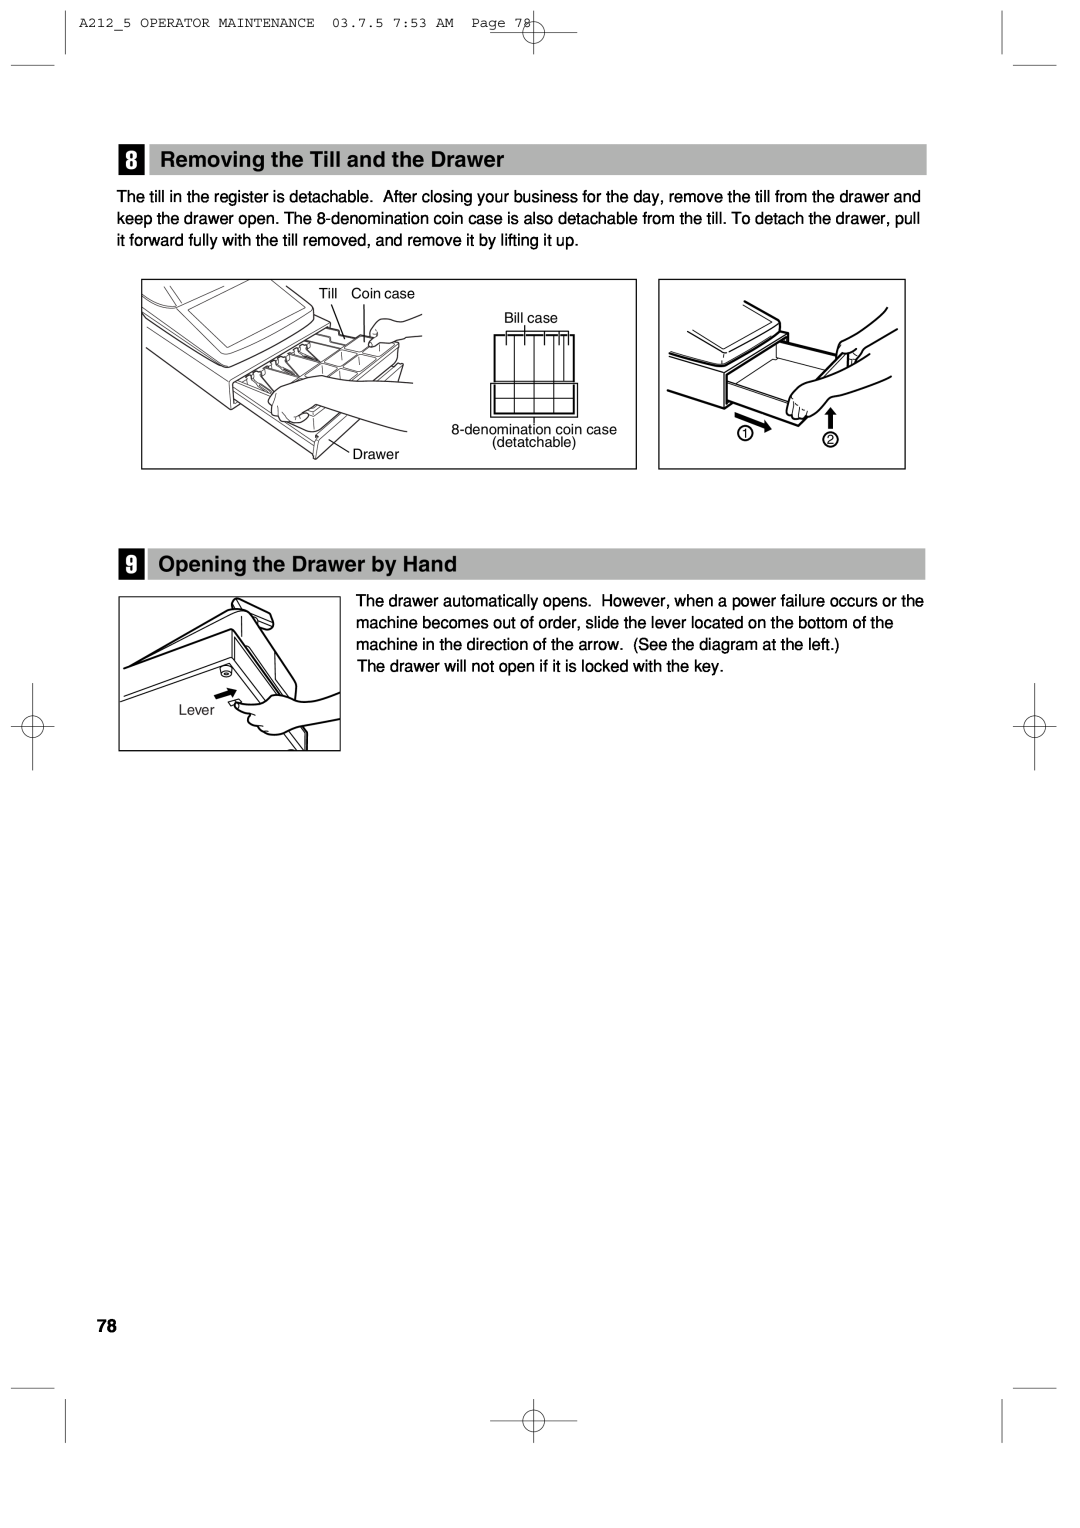 Sharp XE-A212 instruction manual Removing the Till and the Drawer, Opening the Drawer by Hand 